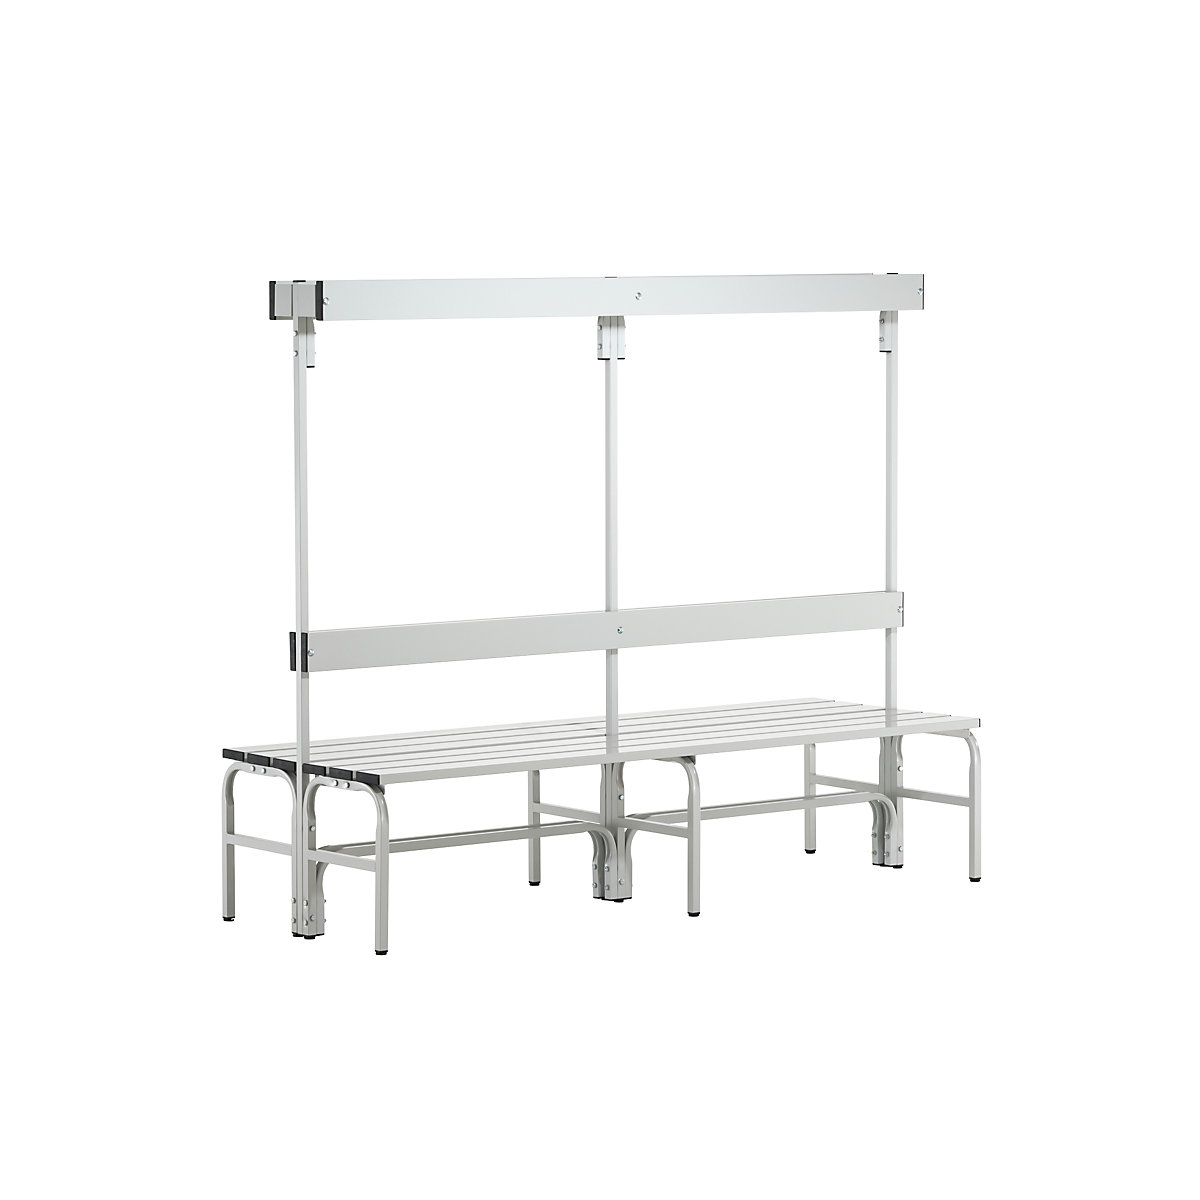 Sypro – Changing room bench with aluminium slats, HxD 1650 x 725 mm, double sided, length 1500 mm, 12 hooks, light grey